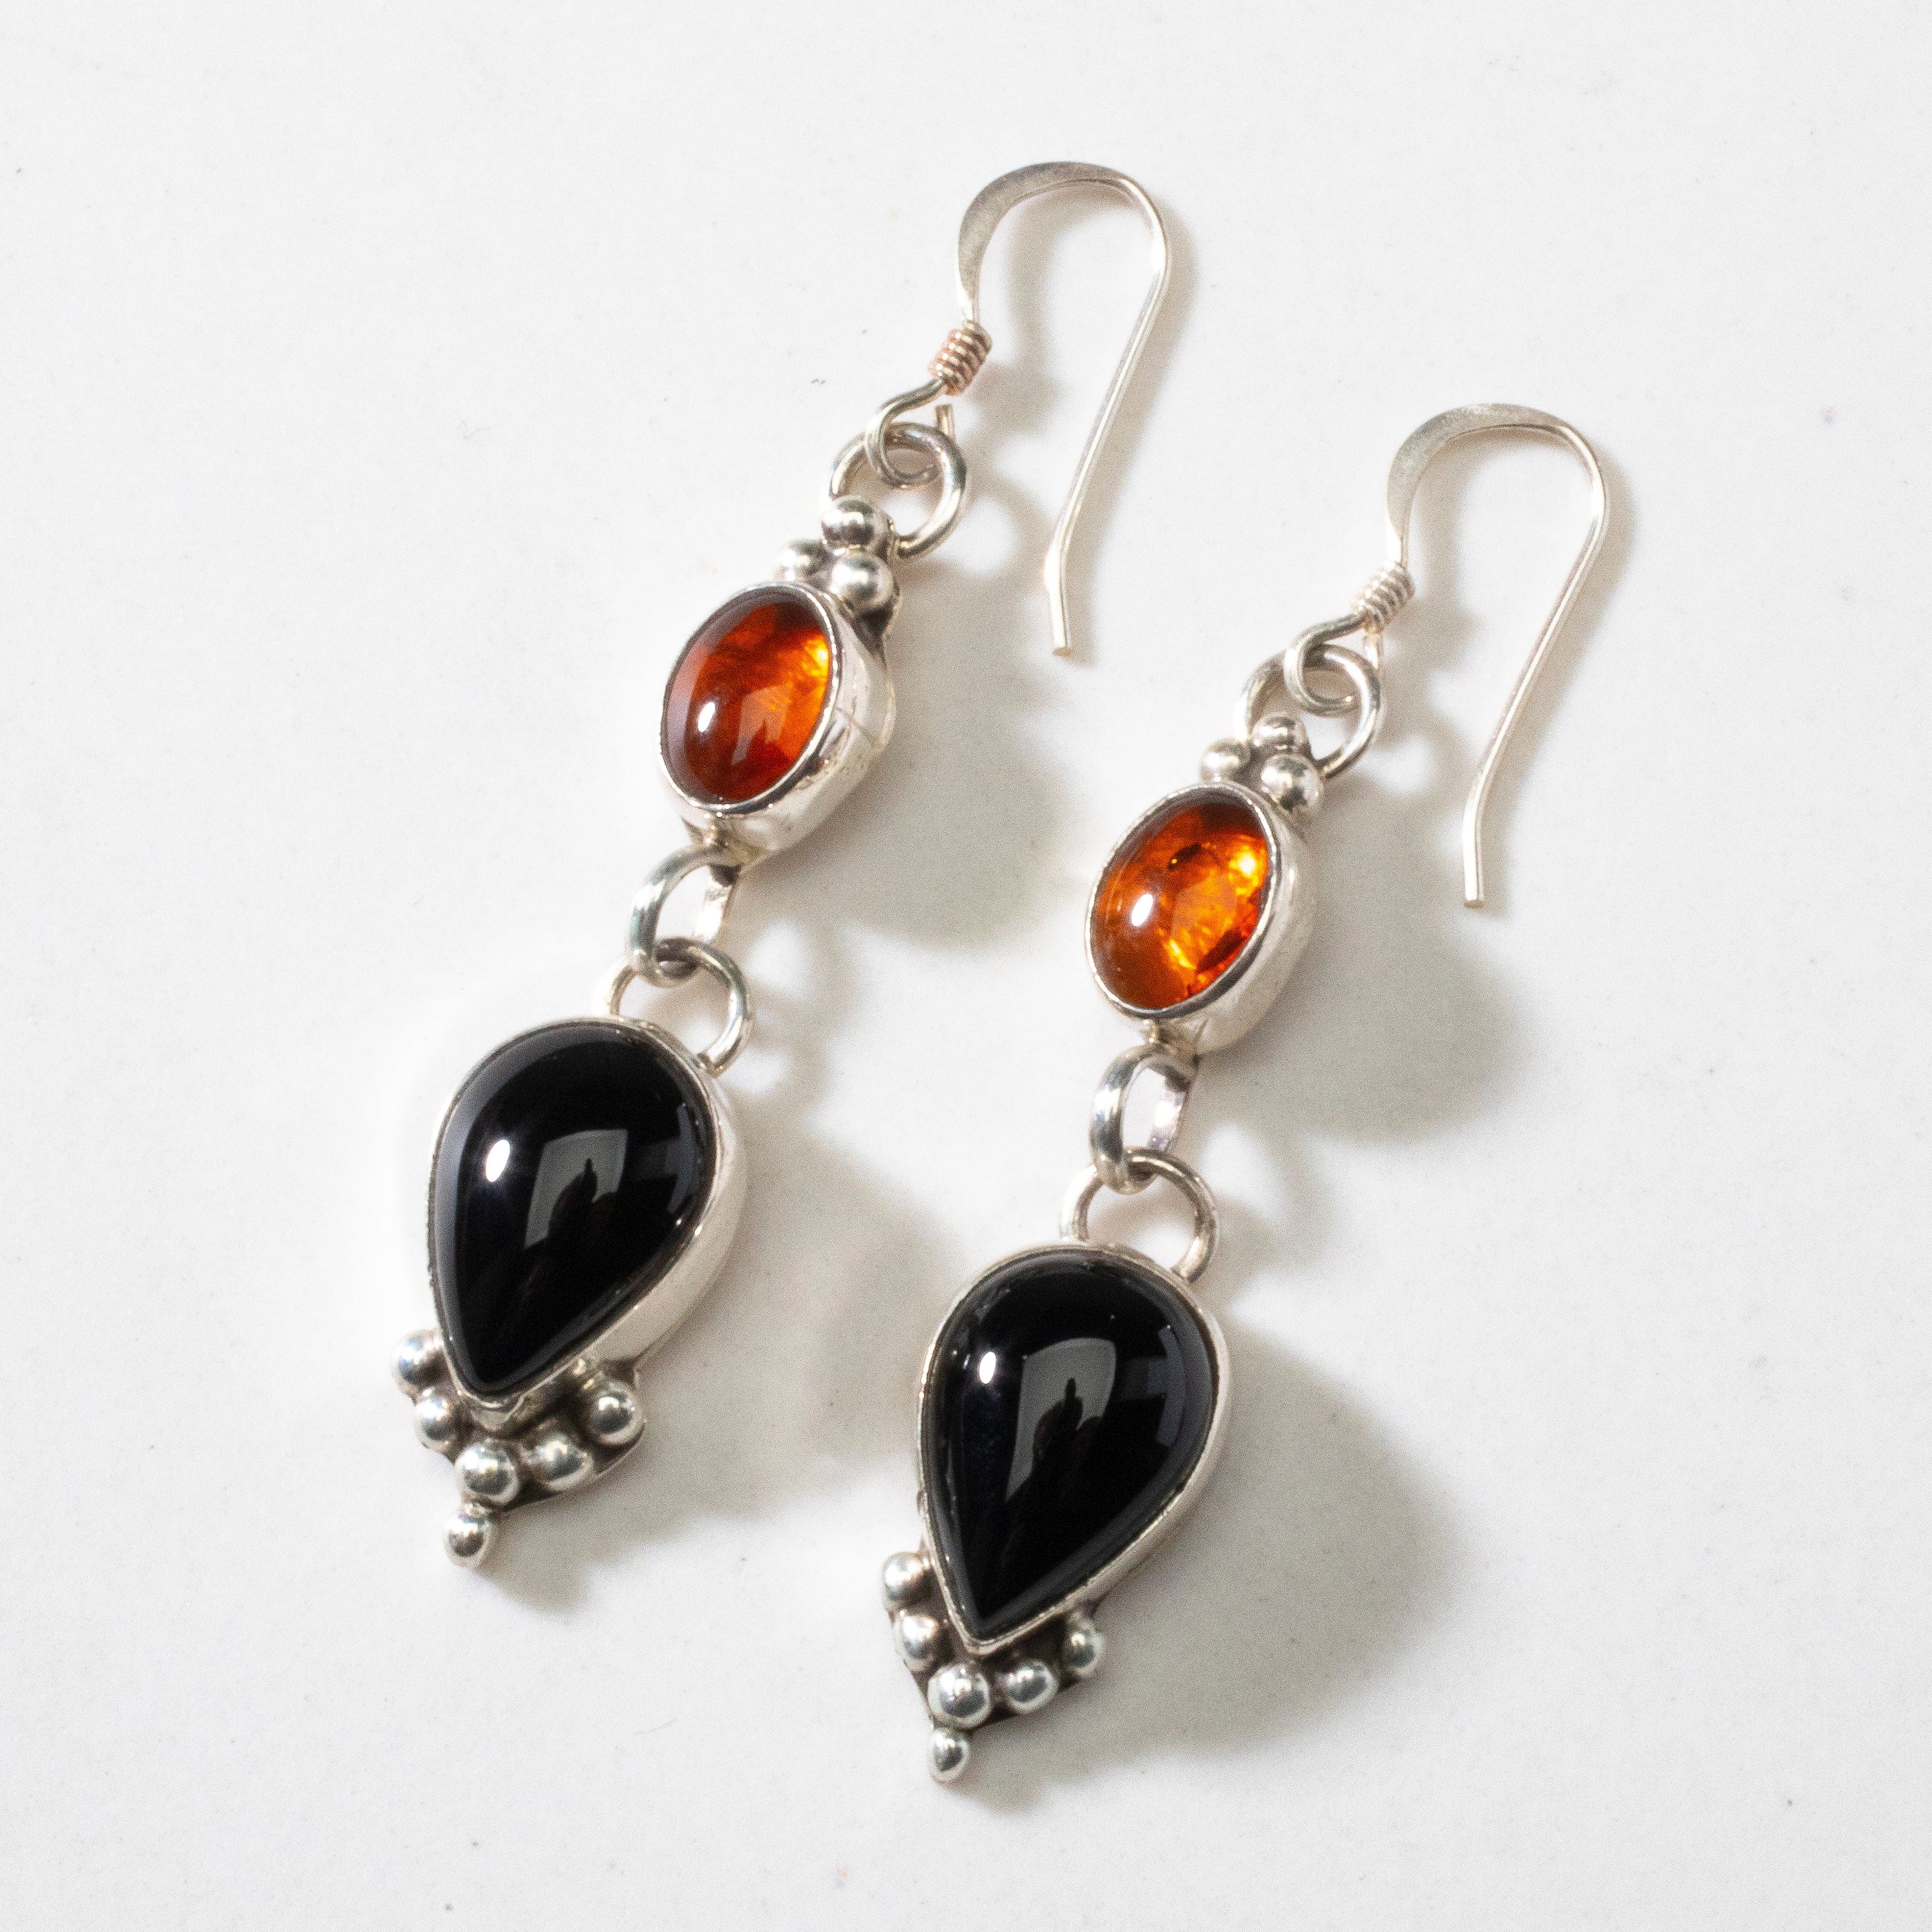 Kalifano Native American Jewelry Baltic Amber & Black Onyx Dangle Navajo USA Native American Made 925 Sterling Silver Earrings with French Hook NAE300.025